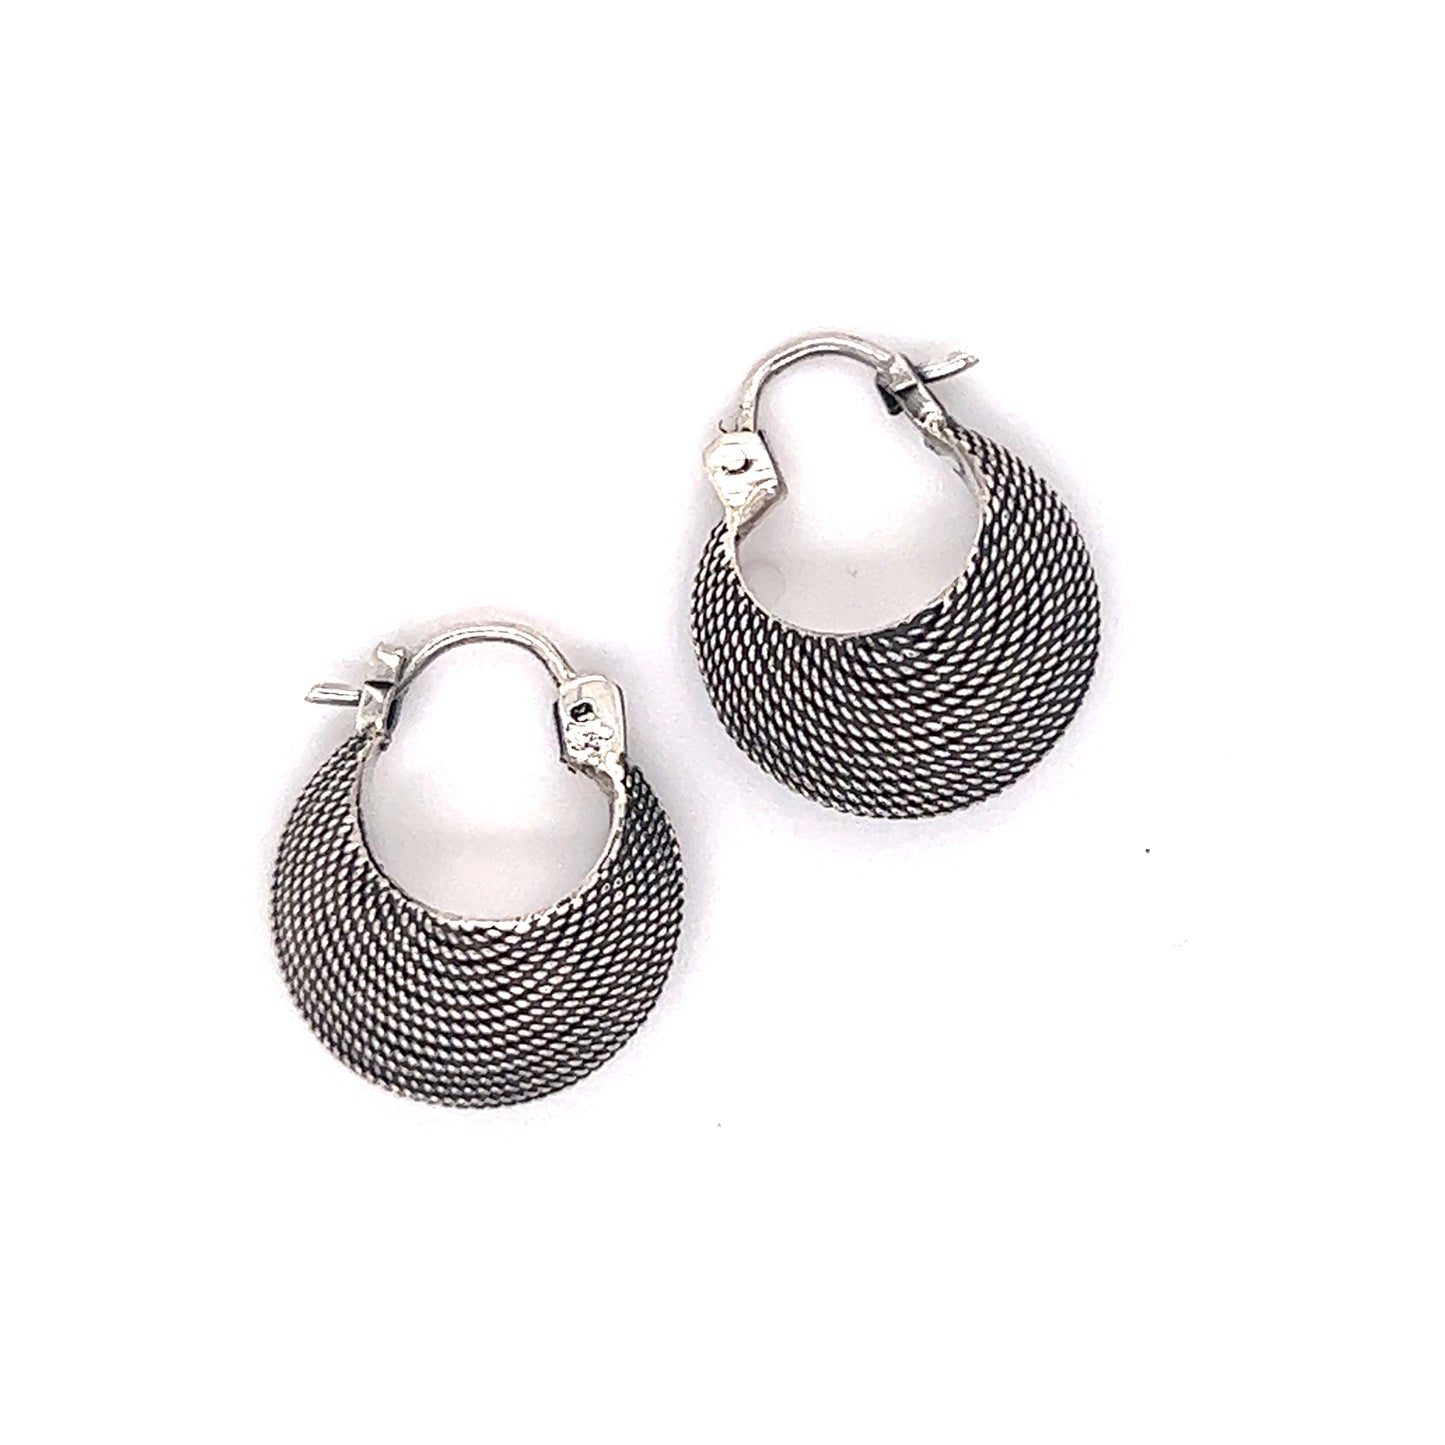 A pair of Dainty Bali Crescent Hoops from Super Silver, shaped like crescent moons on a white background.